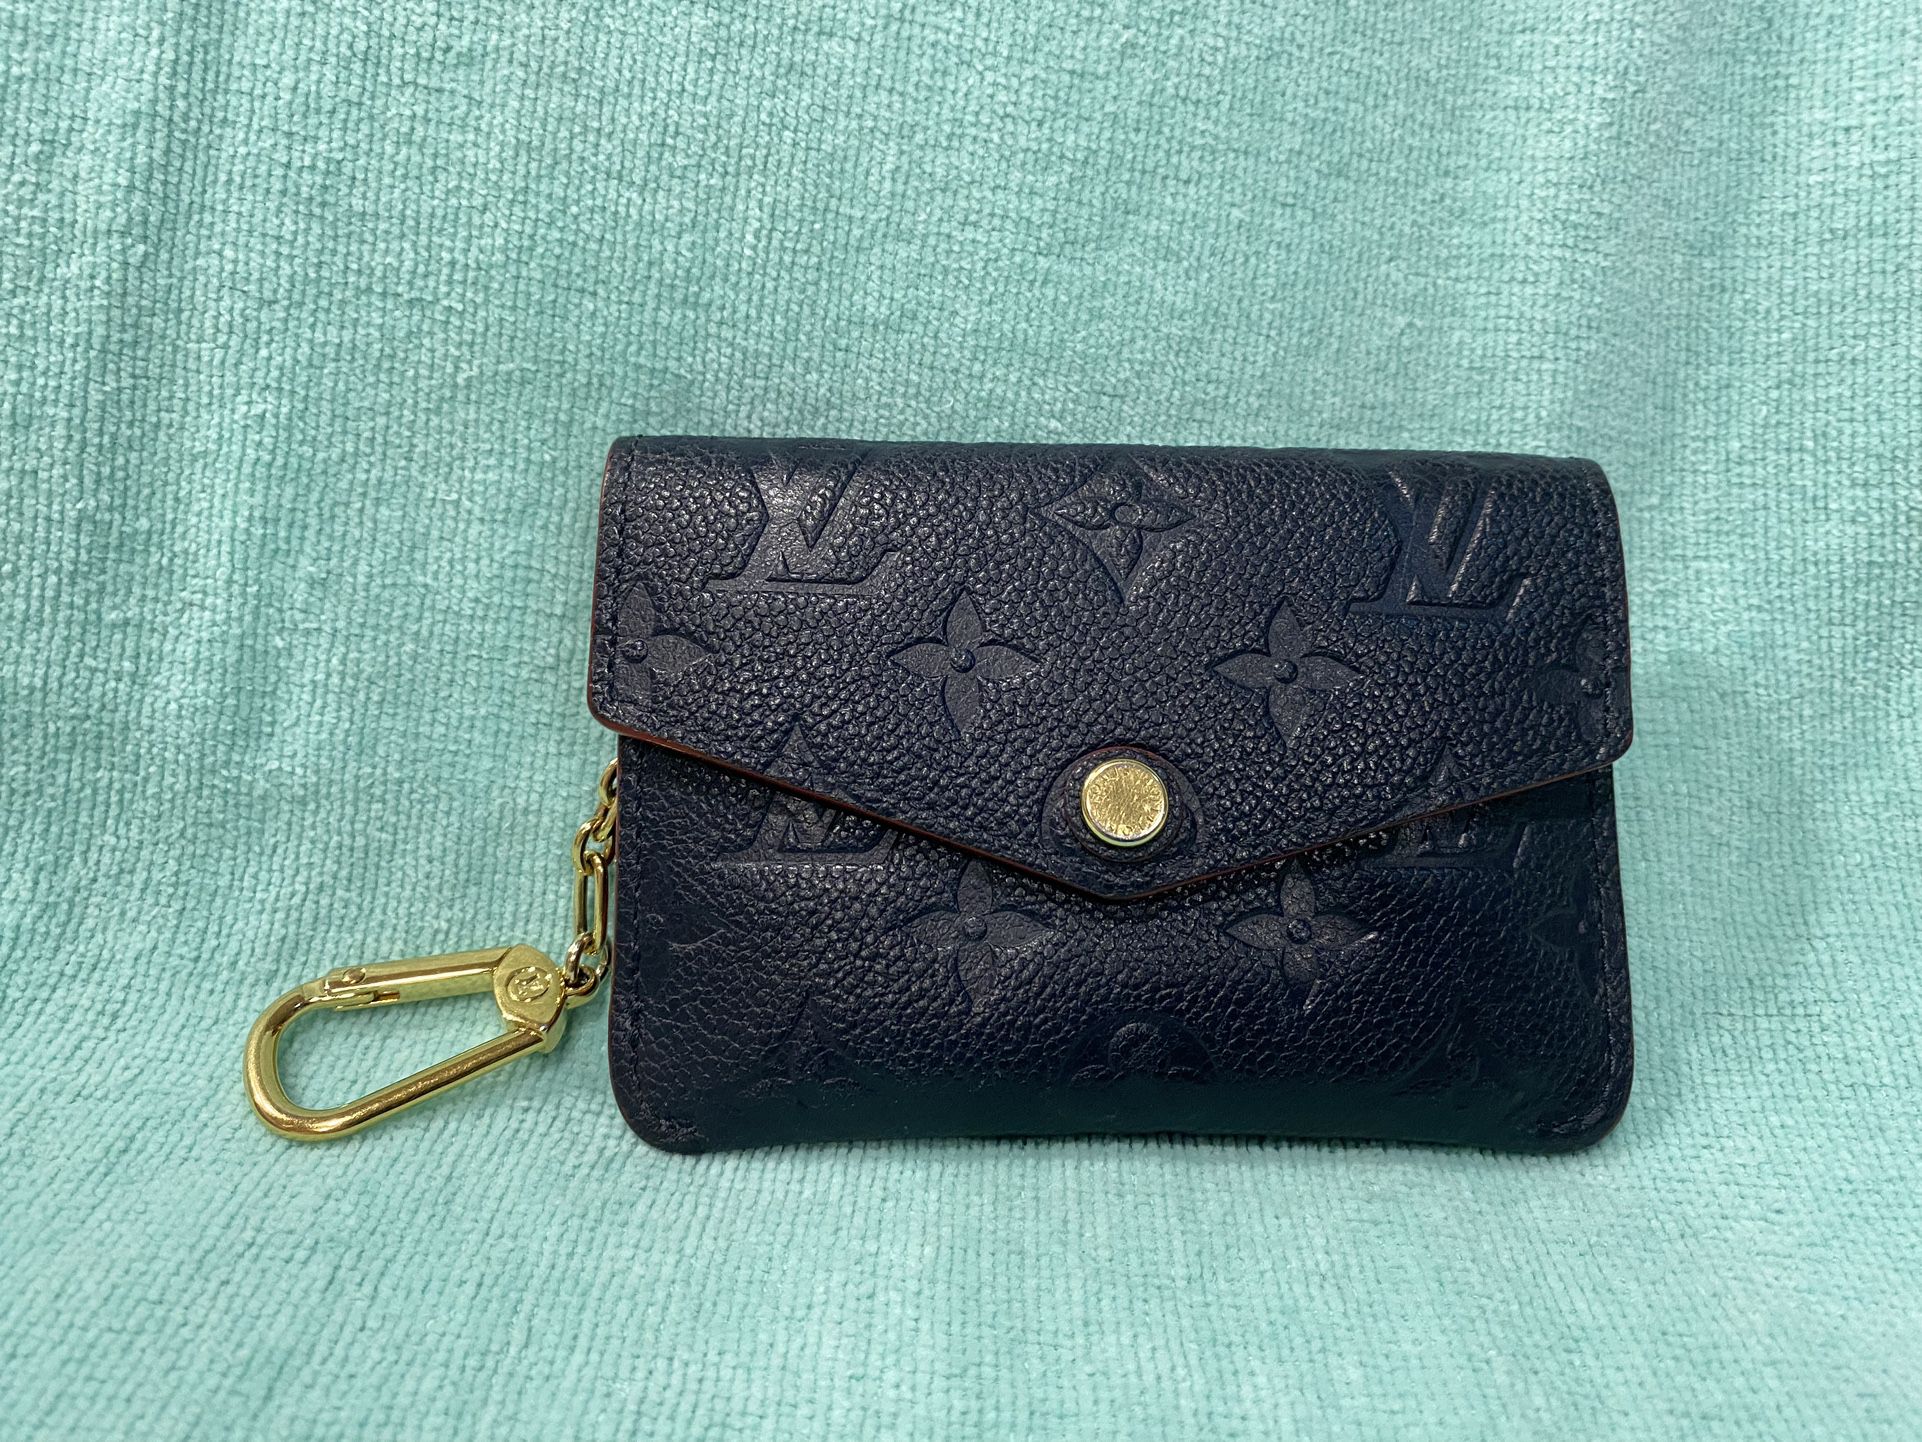 LOUIS VUITTON Key Pouch Coin Change Purse Attached Key Ring Chain